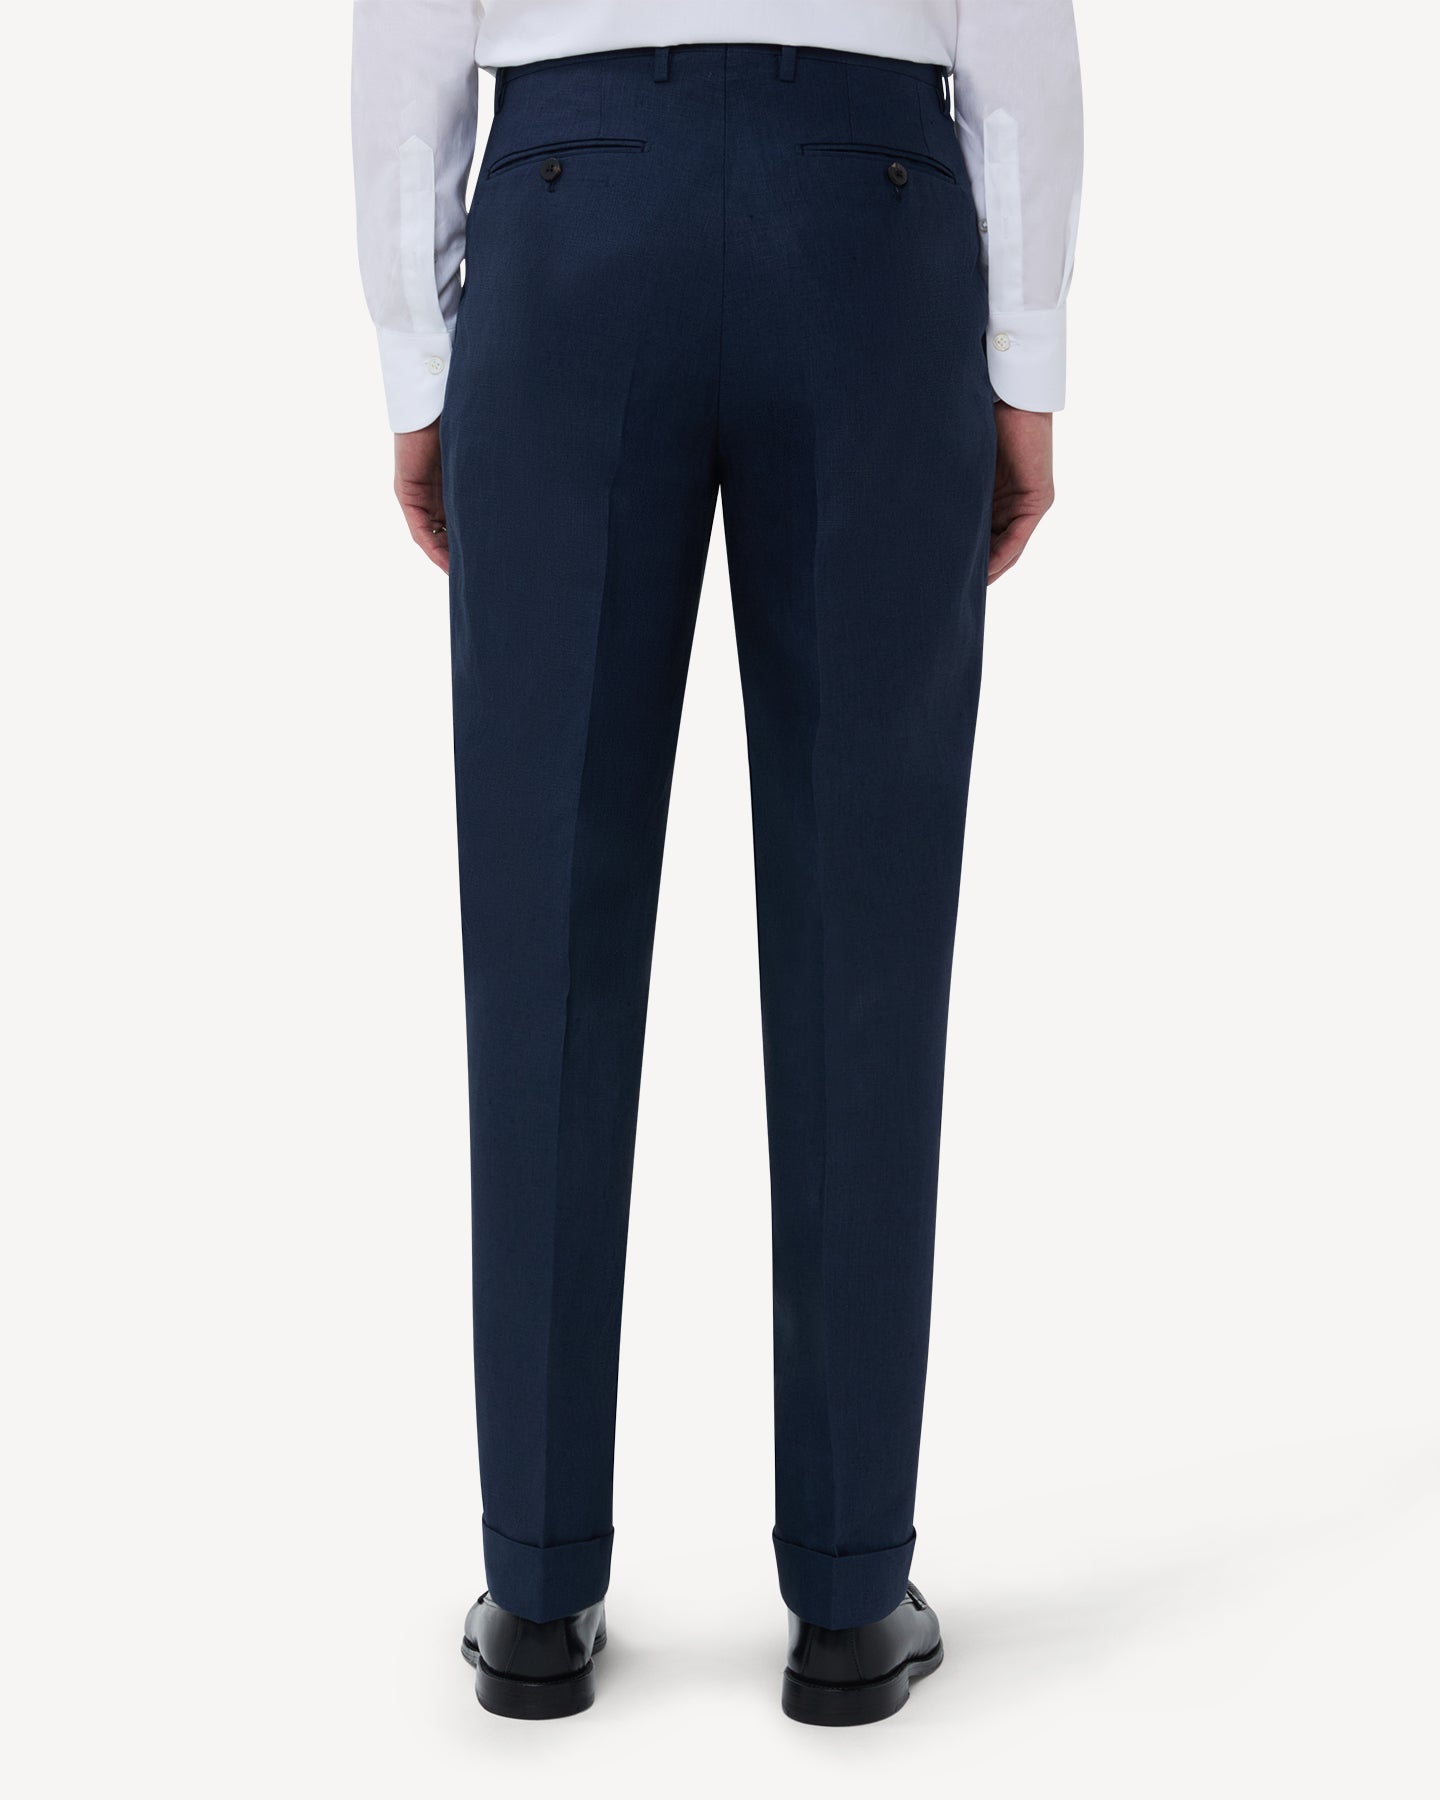 The back of navy linen trousers with double pleats and belt loops